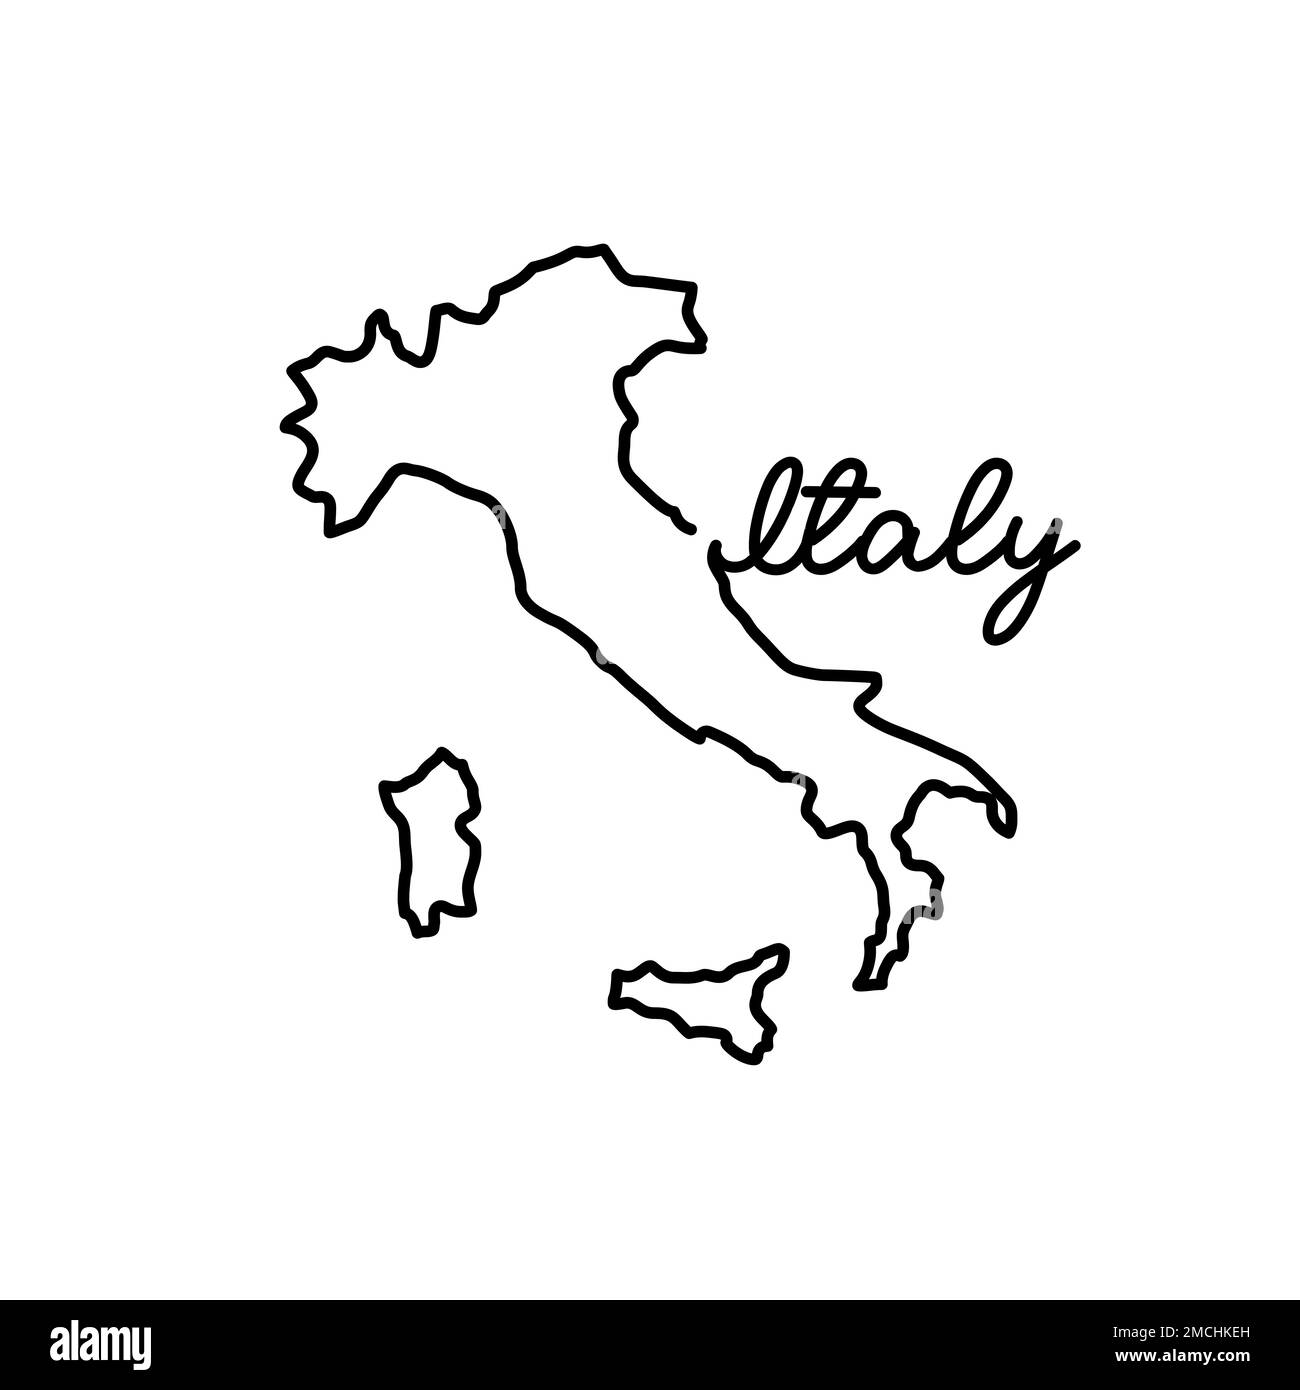 Italy outline map with the handwritten country name. Continuous line drawing of patriotic home sign. A love for a small homeland. T-shirt print idea. Stock Photo